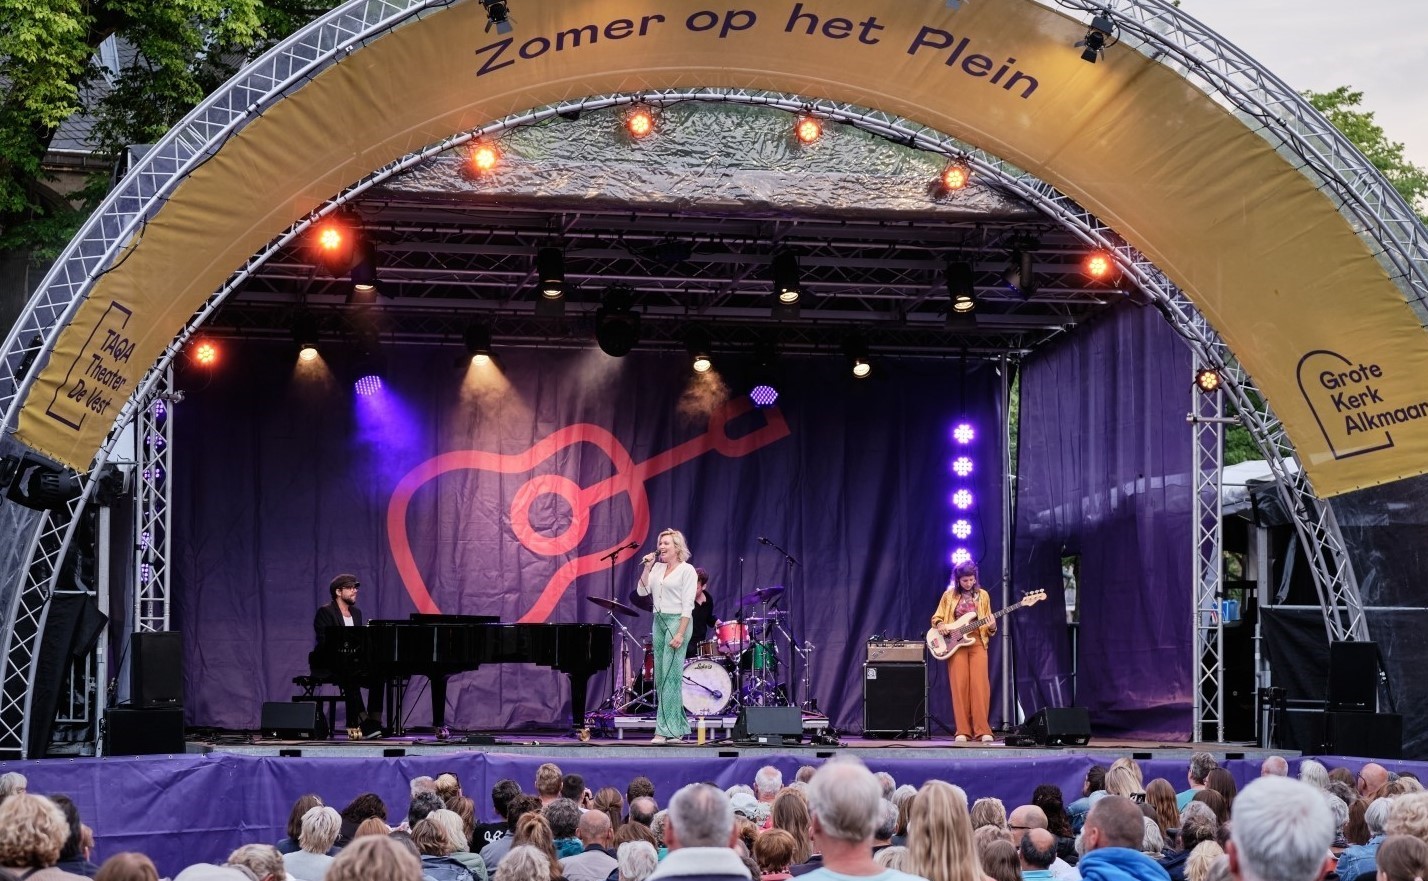 20-facts-about-zomer-op-het-plein-summer-on-the-square